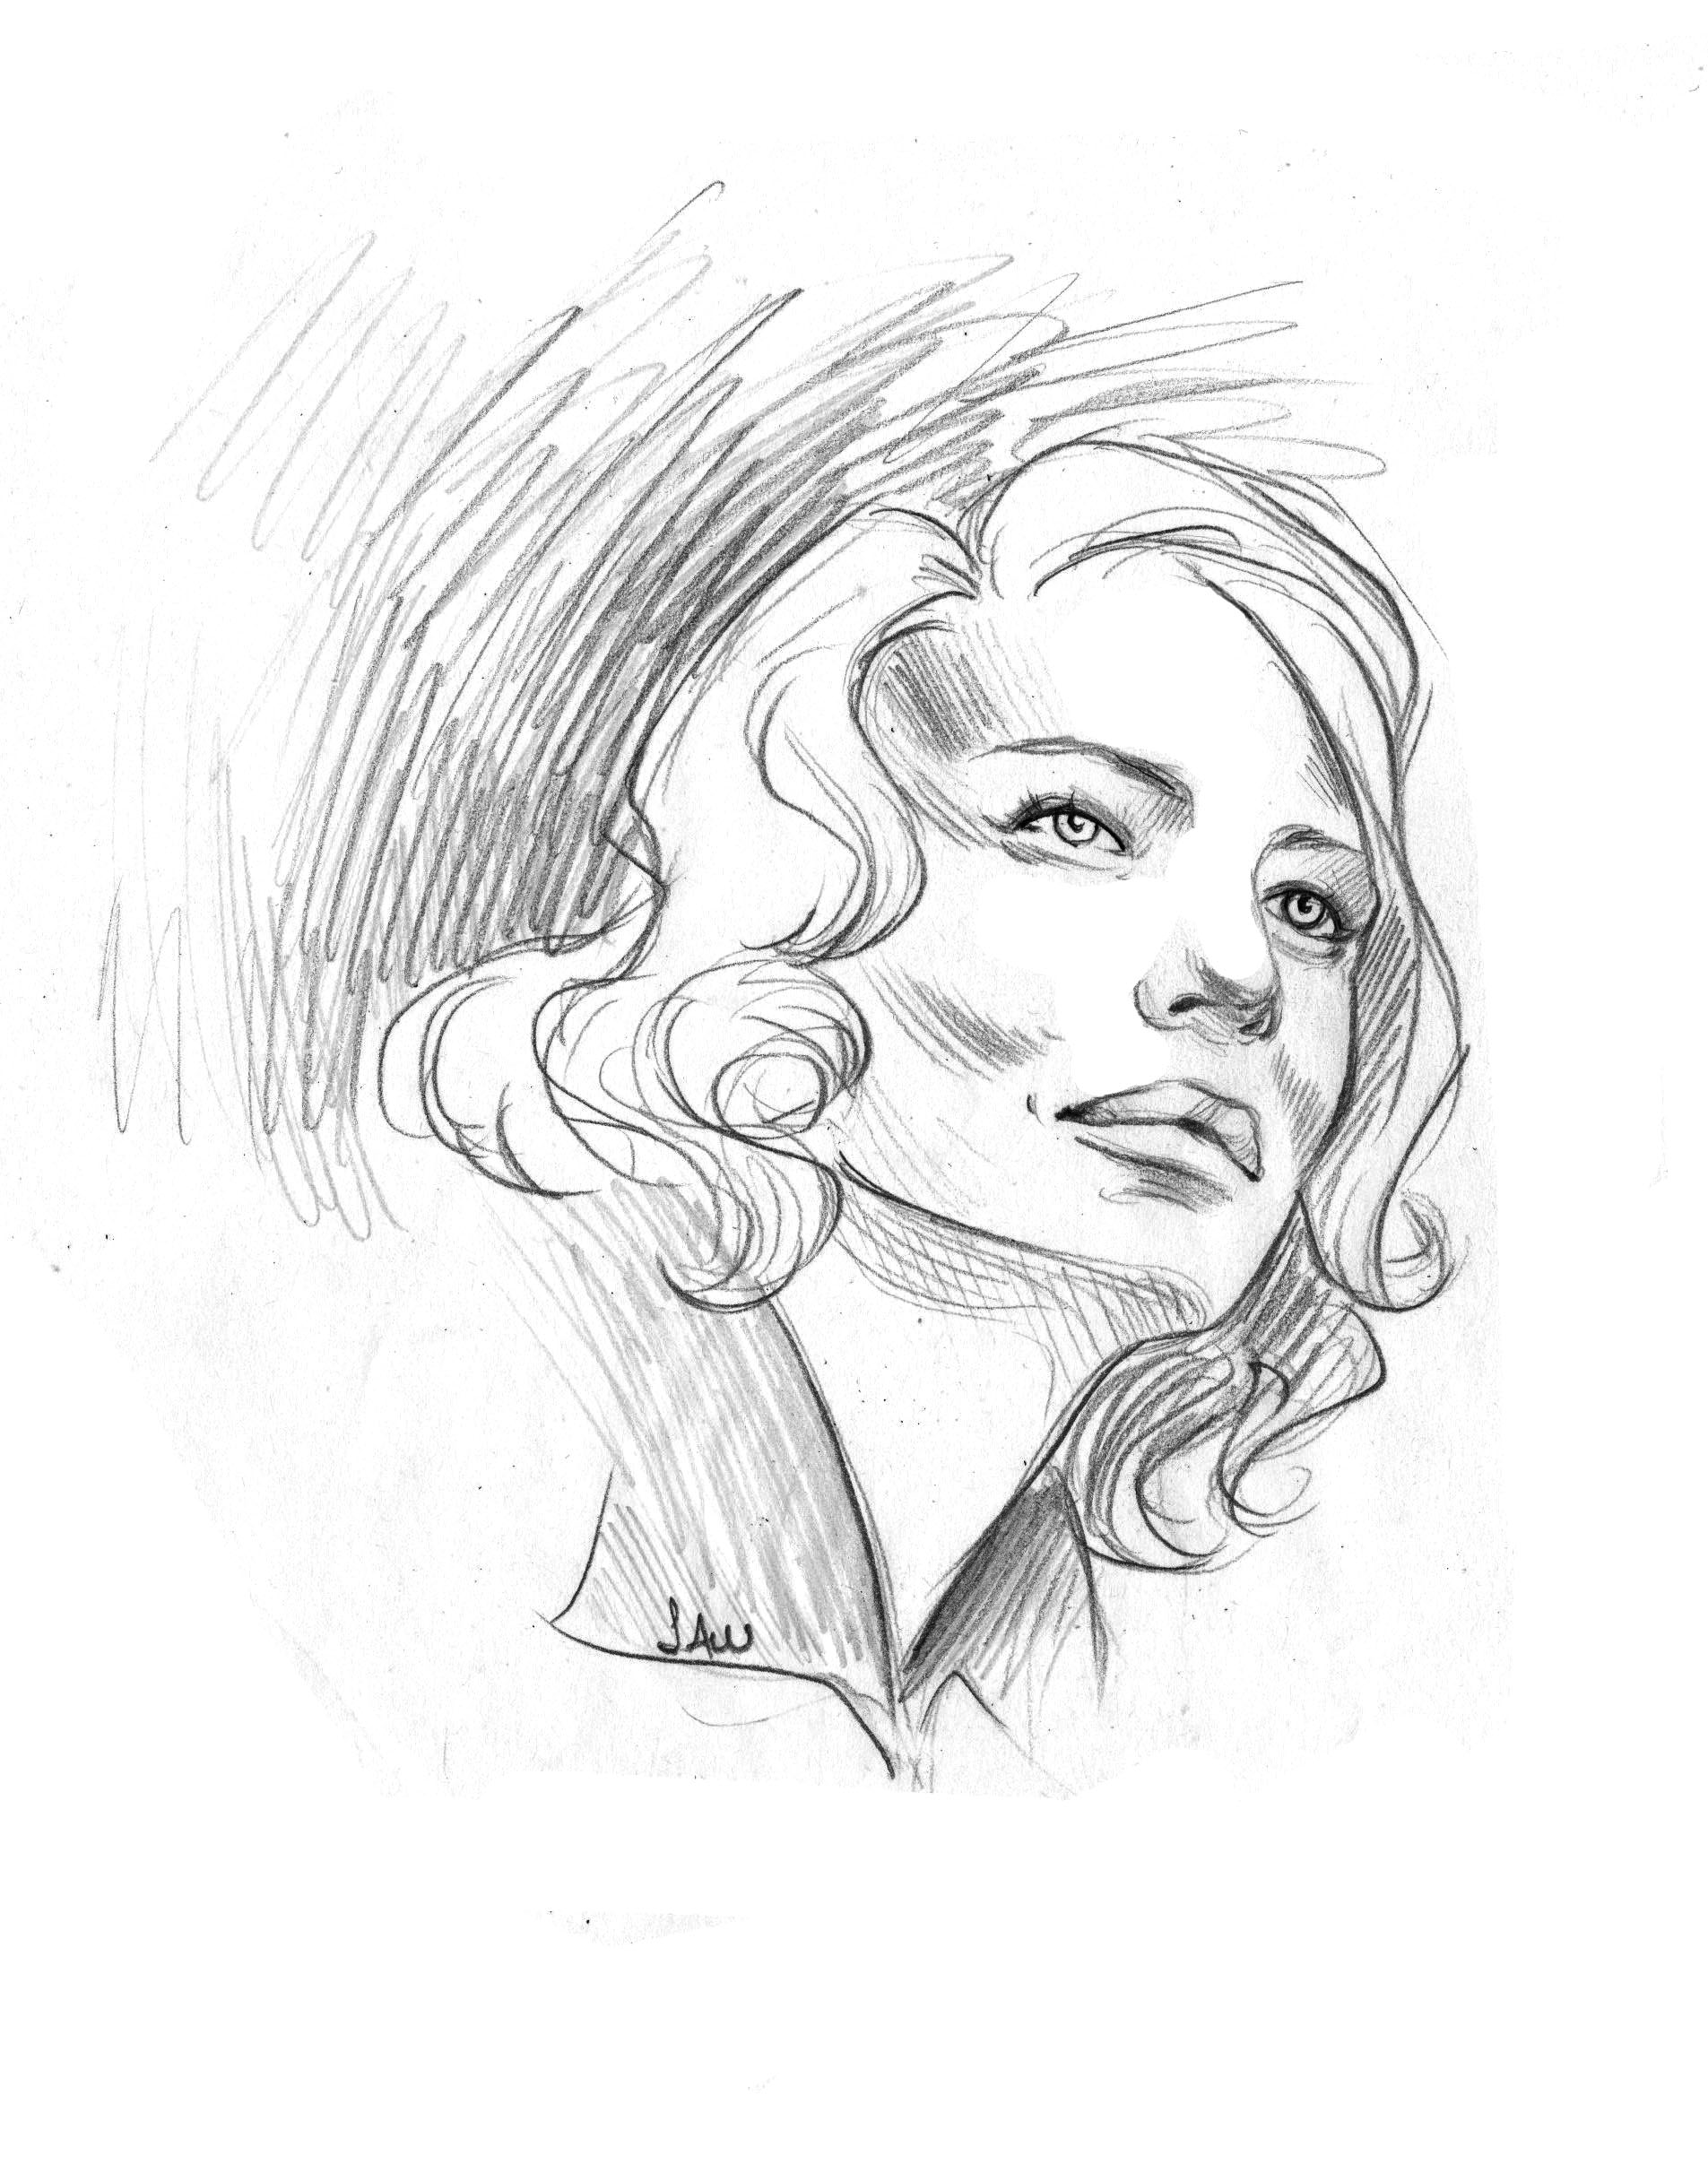 Check out these amazing illustrations of Cate Blanchett as Carol ...